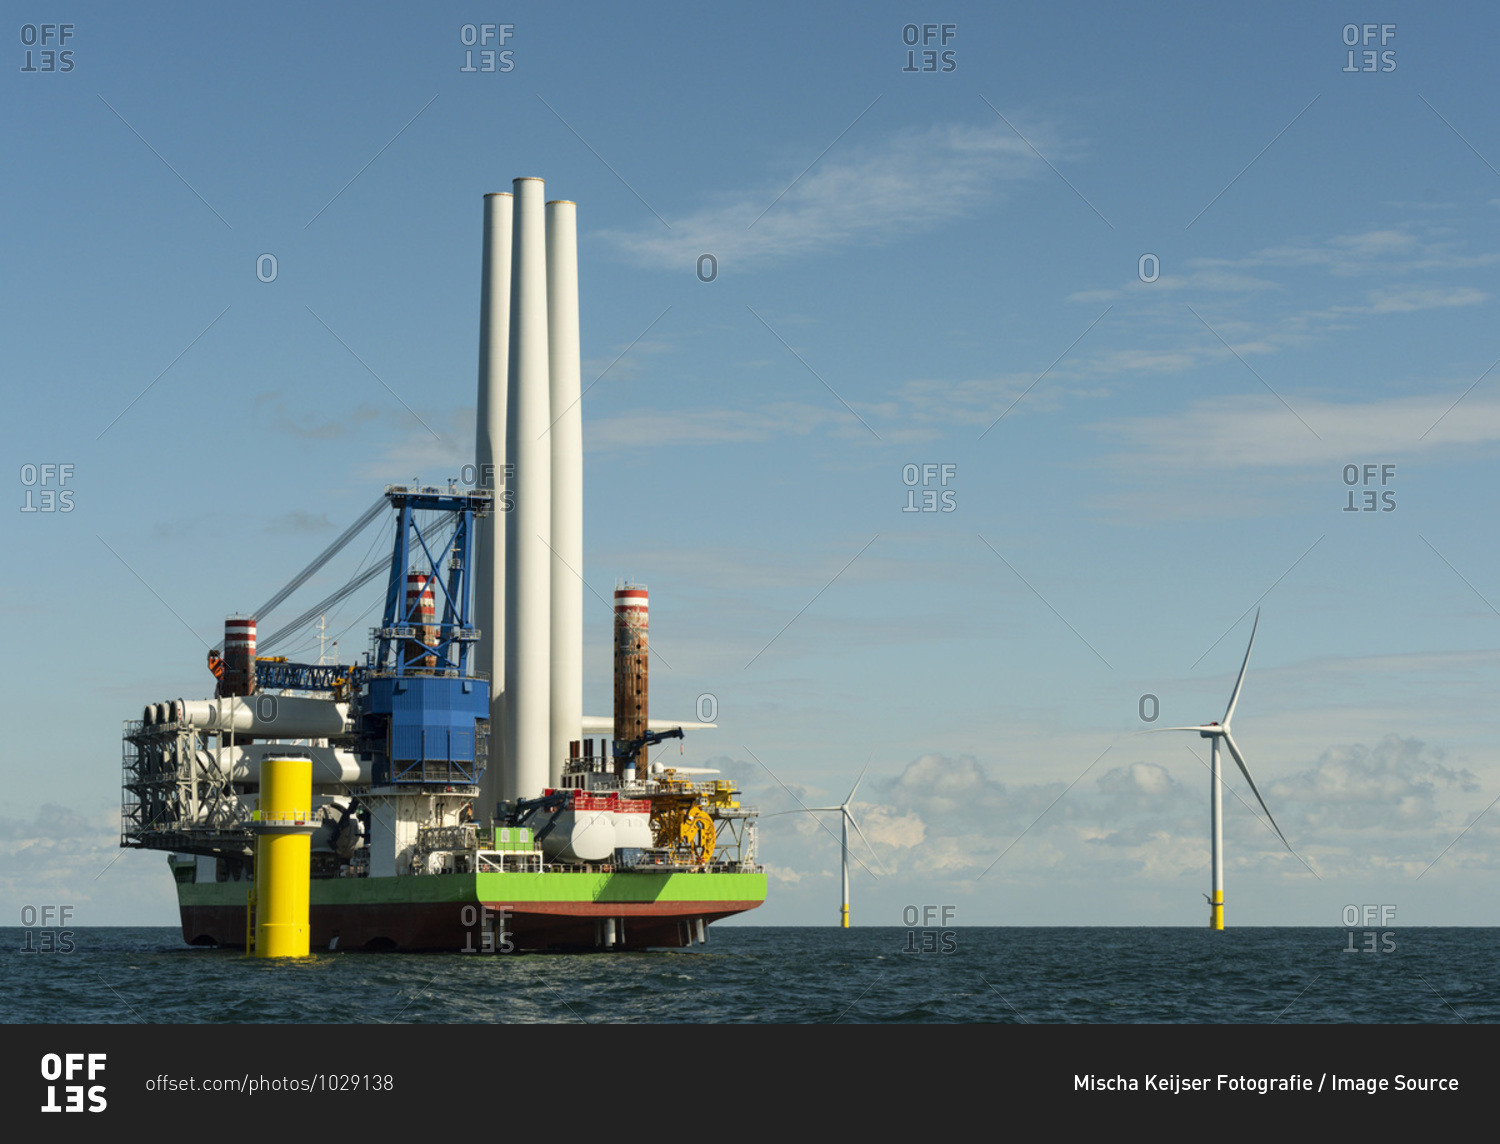 Very large offshore wind farms being built in the Netherlands